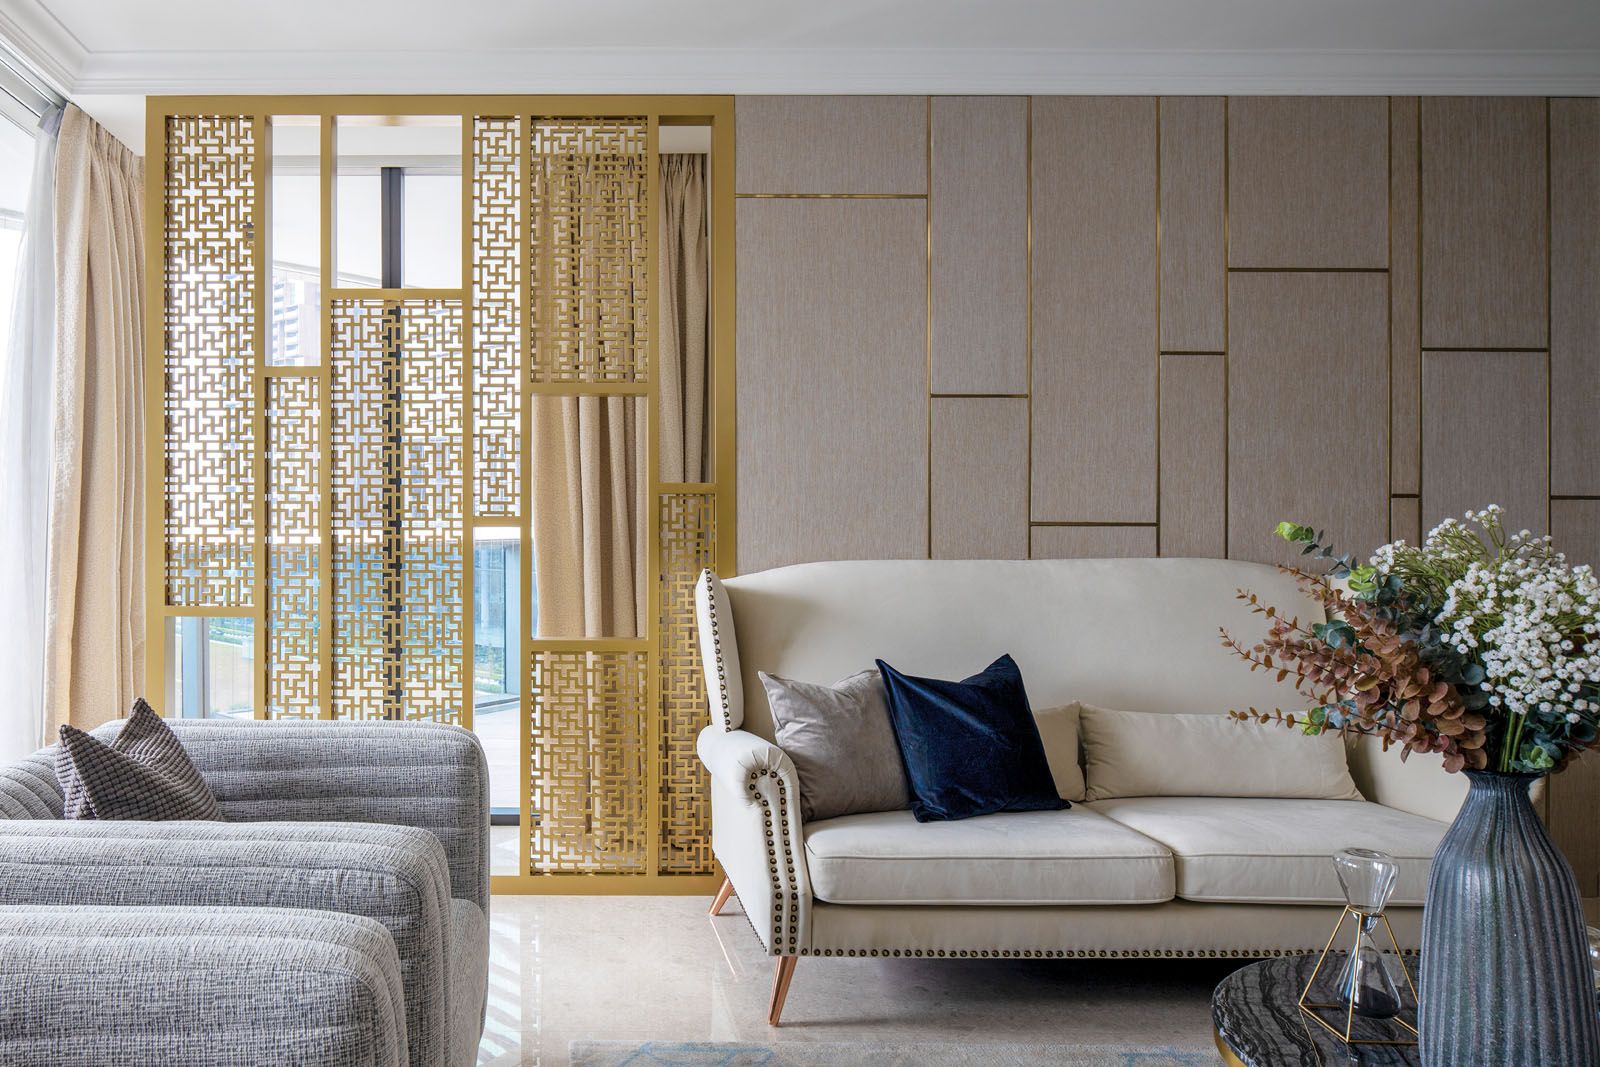 The gold lattice screen brings an opulent touch to the home while the neutral palette keeps the look elegant